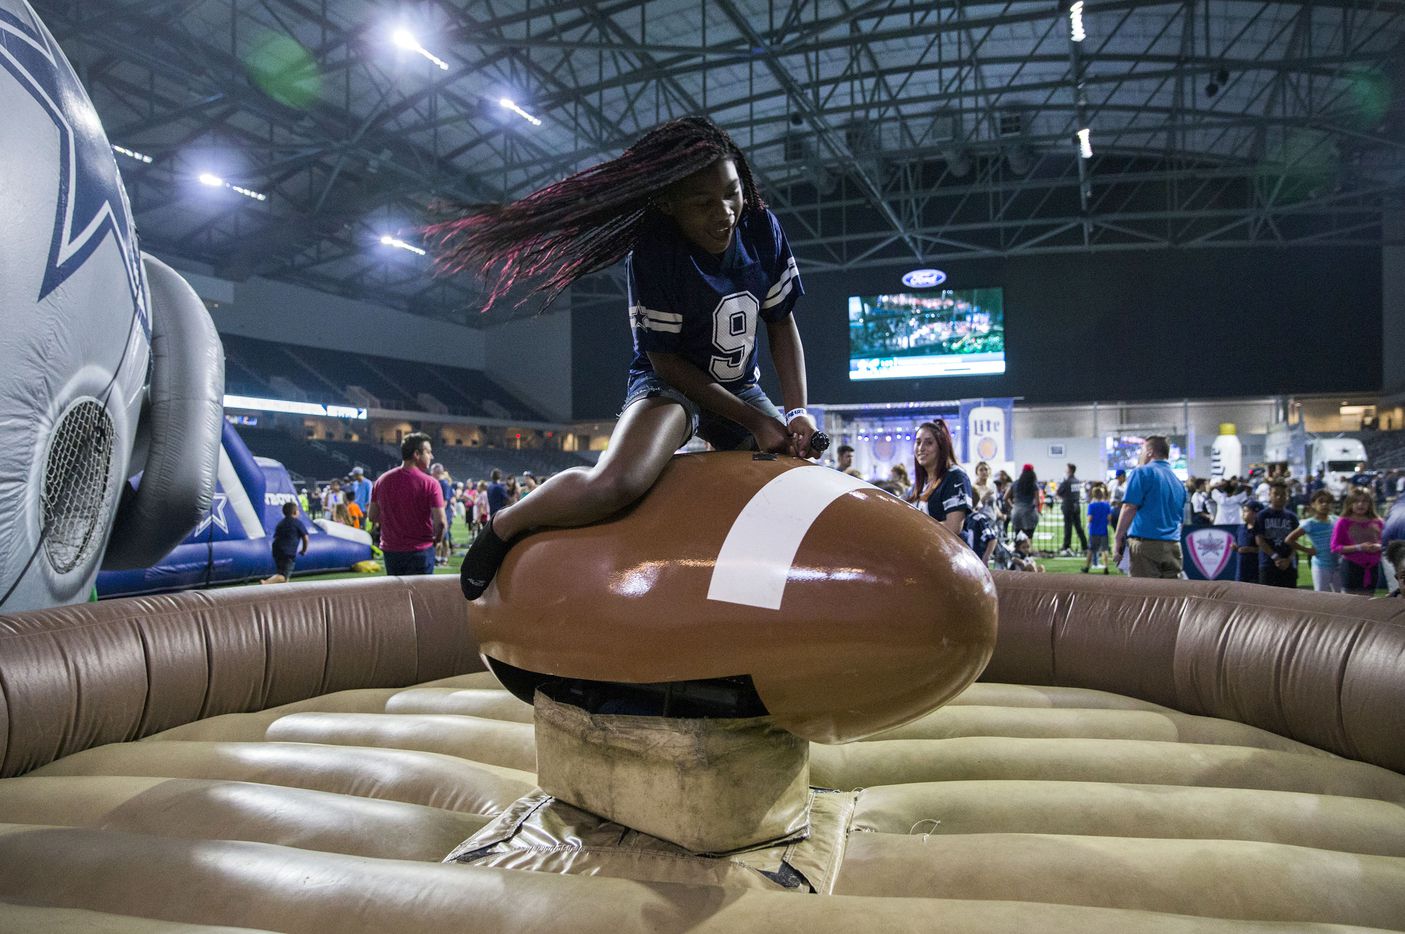 Laceon Donaldson, 11, rides a mechanical football during the Dallas Cowboys' 2017 NFL Draft Party on Friday, April 28, 2017, at The Star in Frisco.